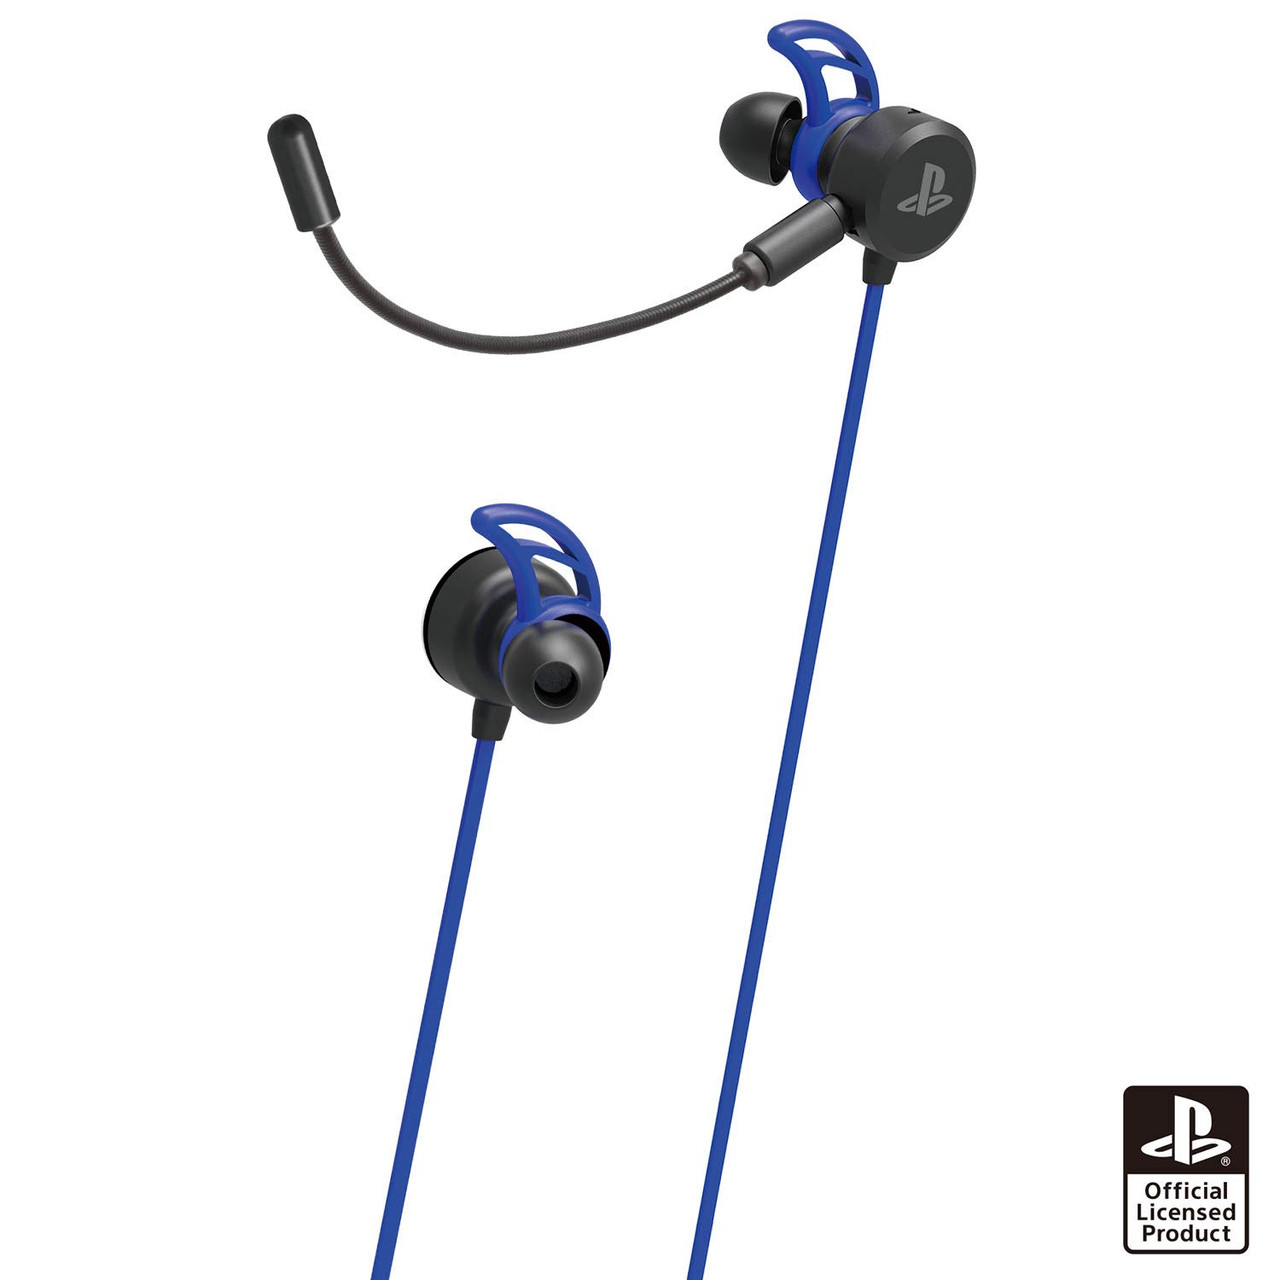 hori gaming headset in ear ps4